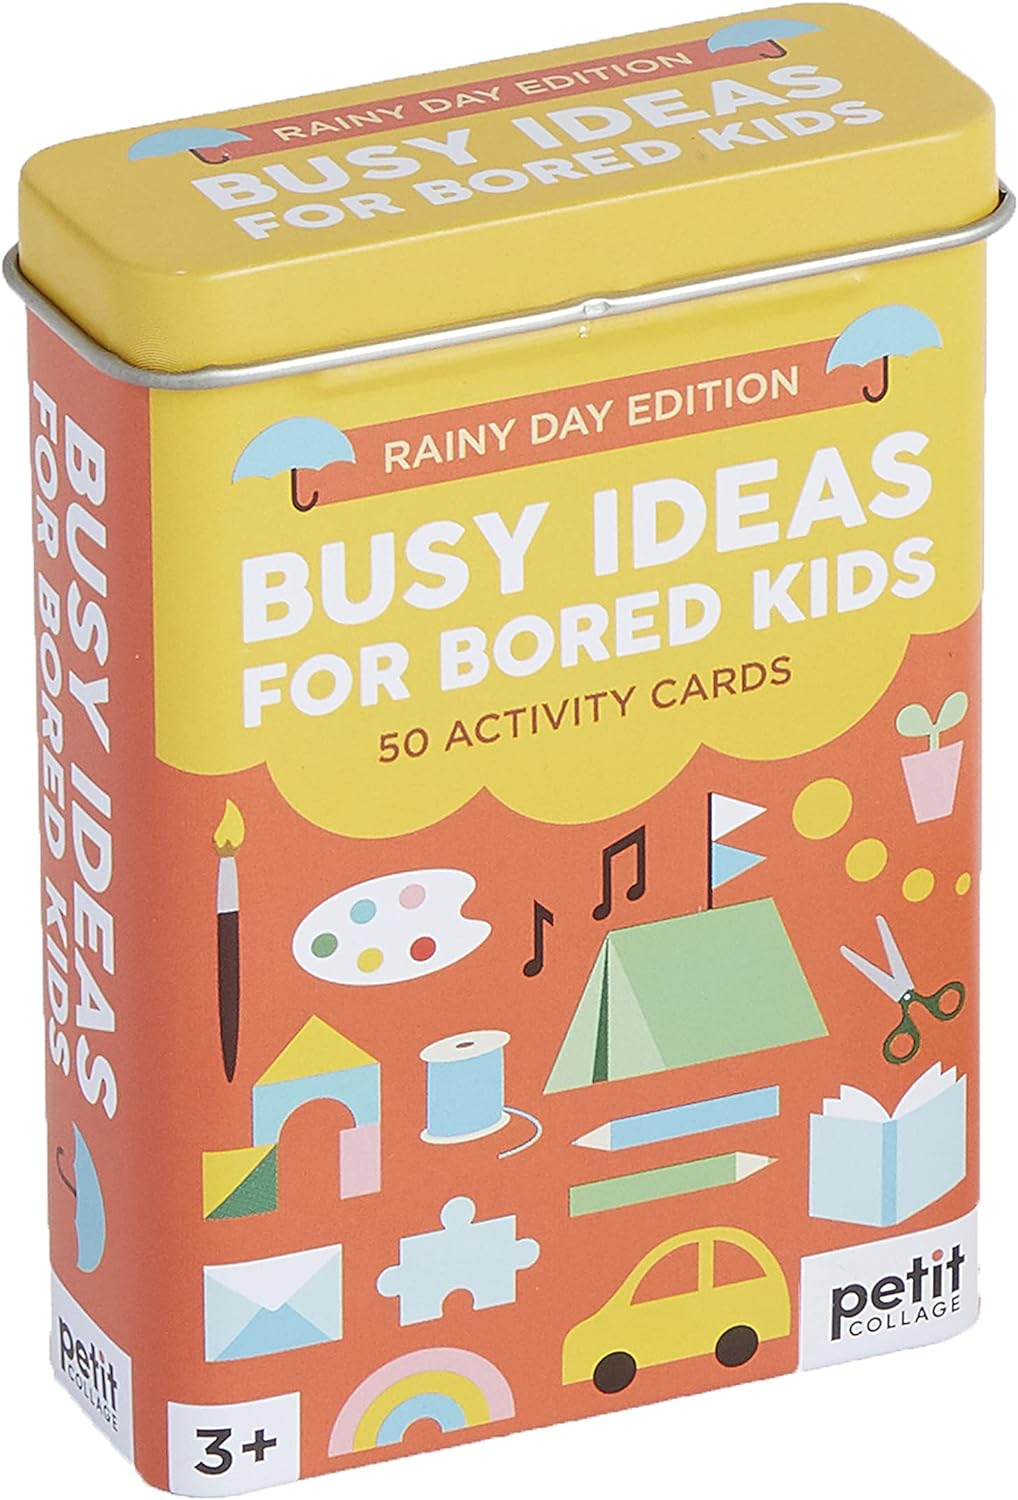 Busy Ideas For Bored Kids: Rainy Day Edition